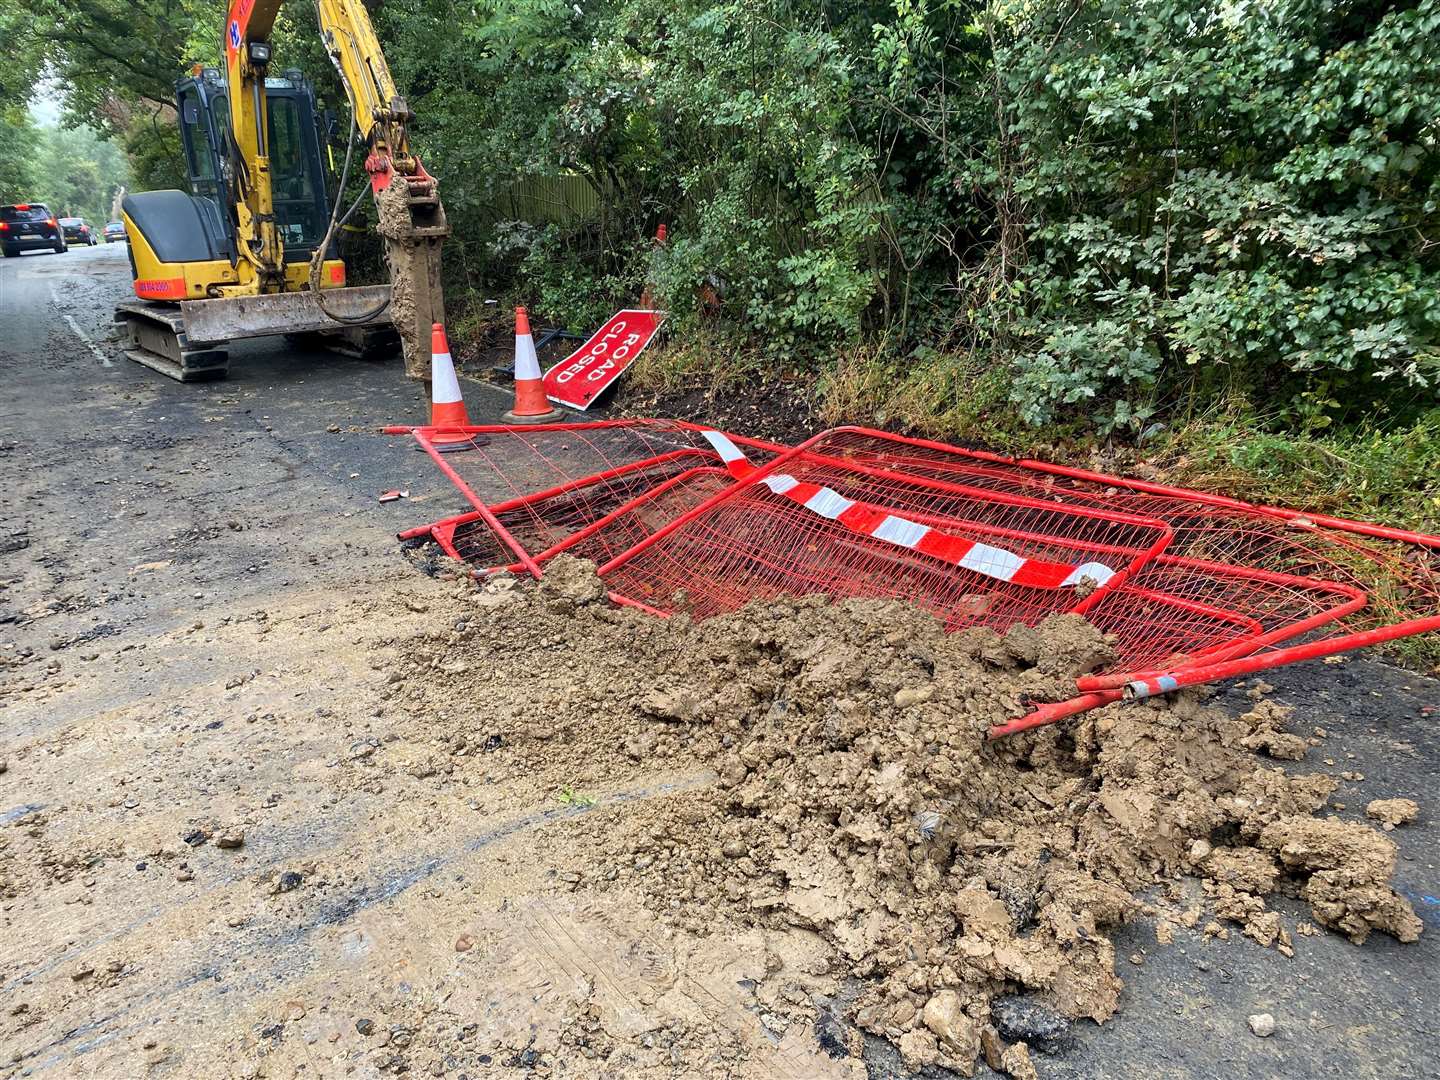 Shalloak Road, Canterbury, is meant to be temporarily closed after a South East Water main burst yesterday afternoon